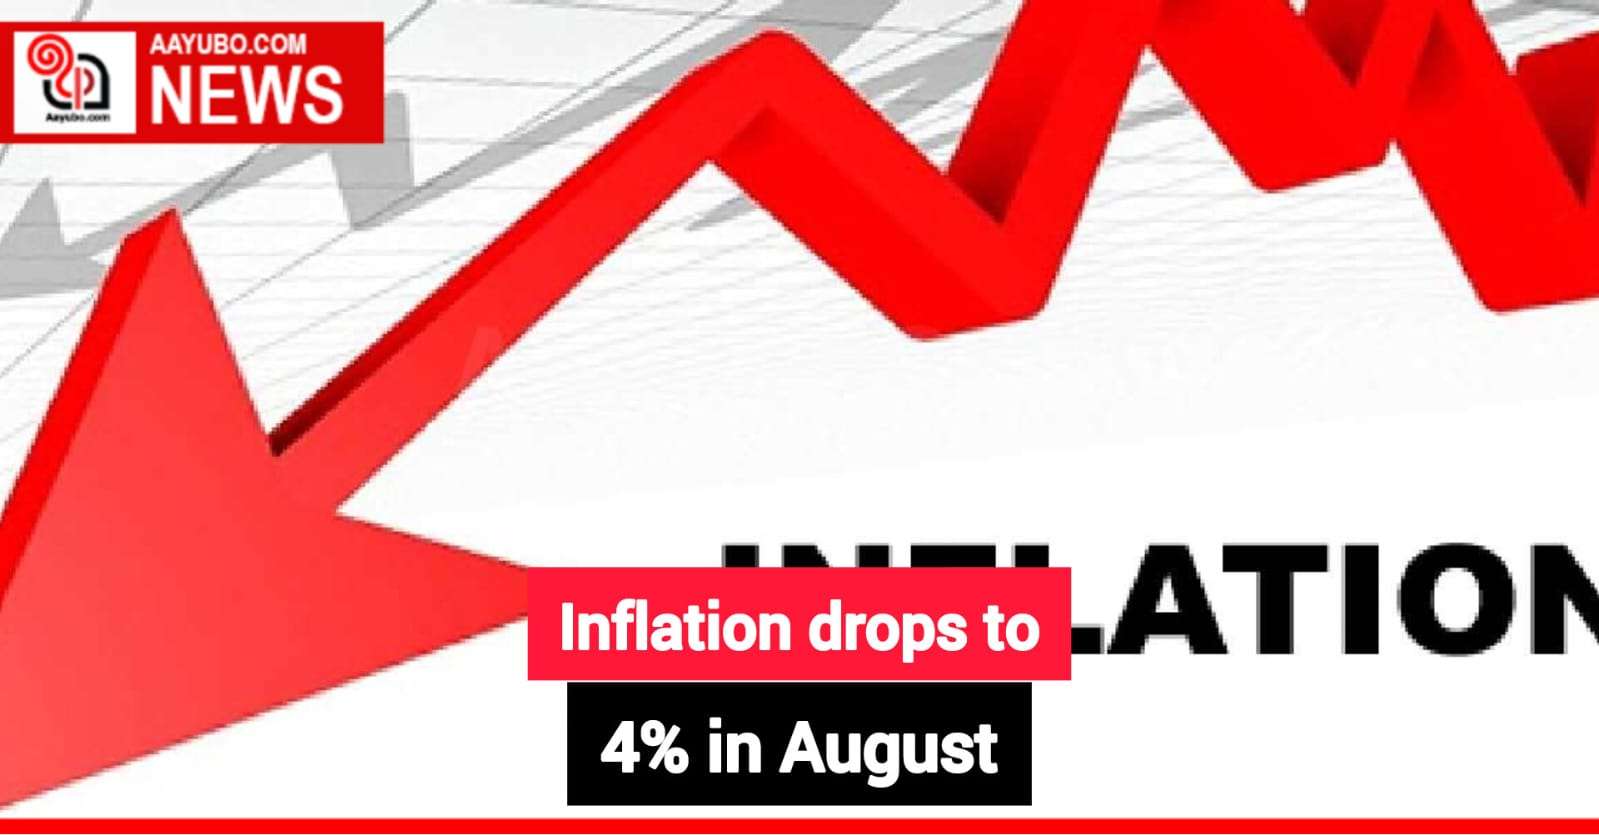 Inflation drops to 4% in August